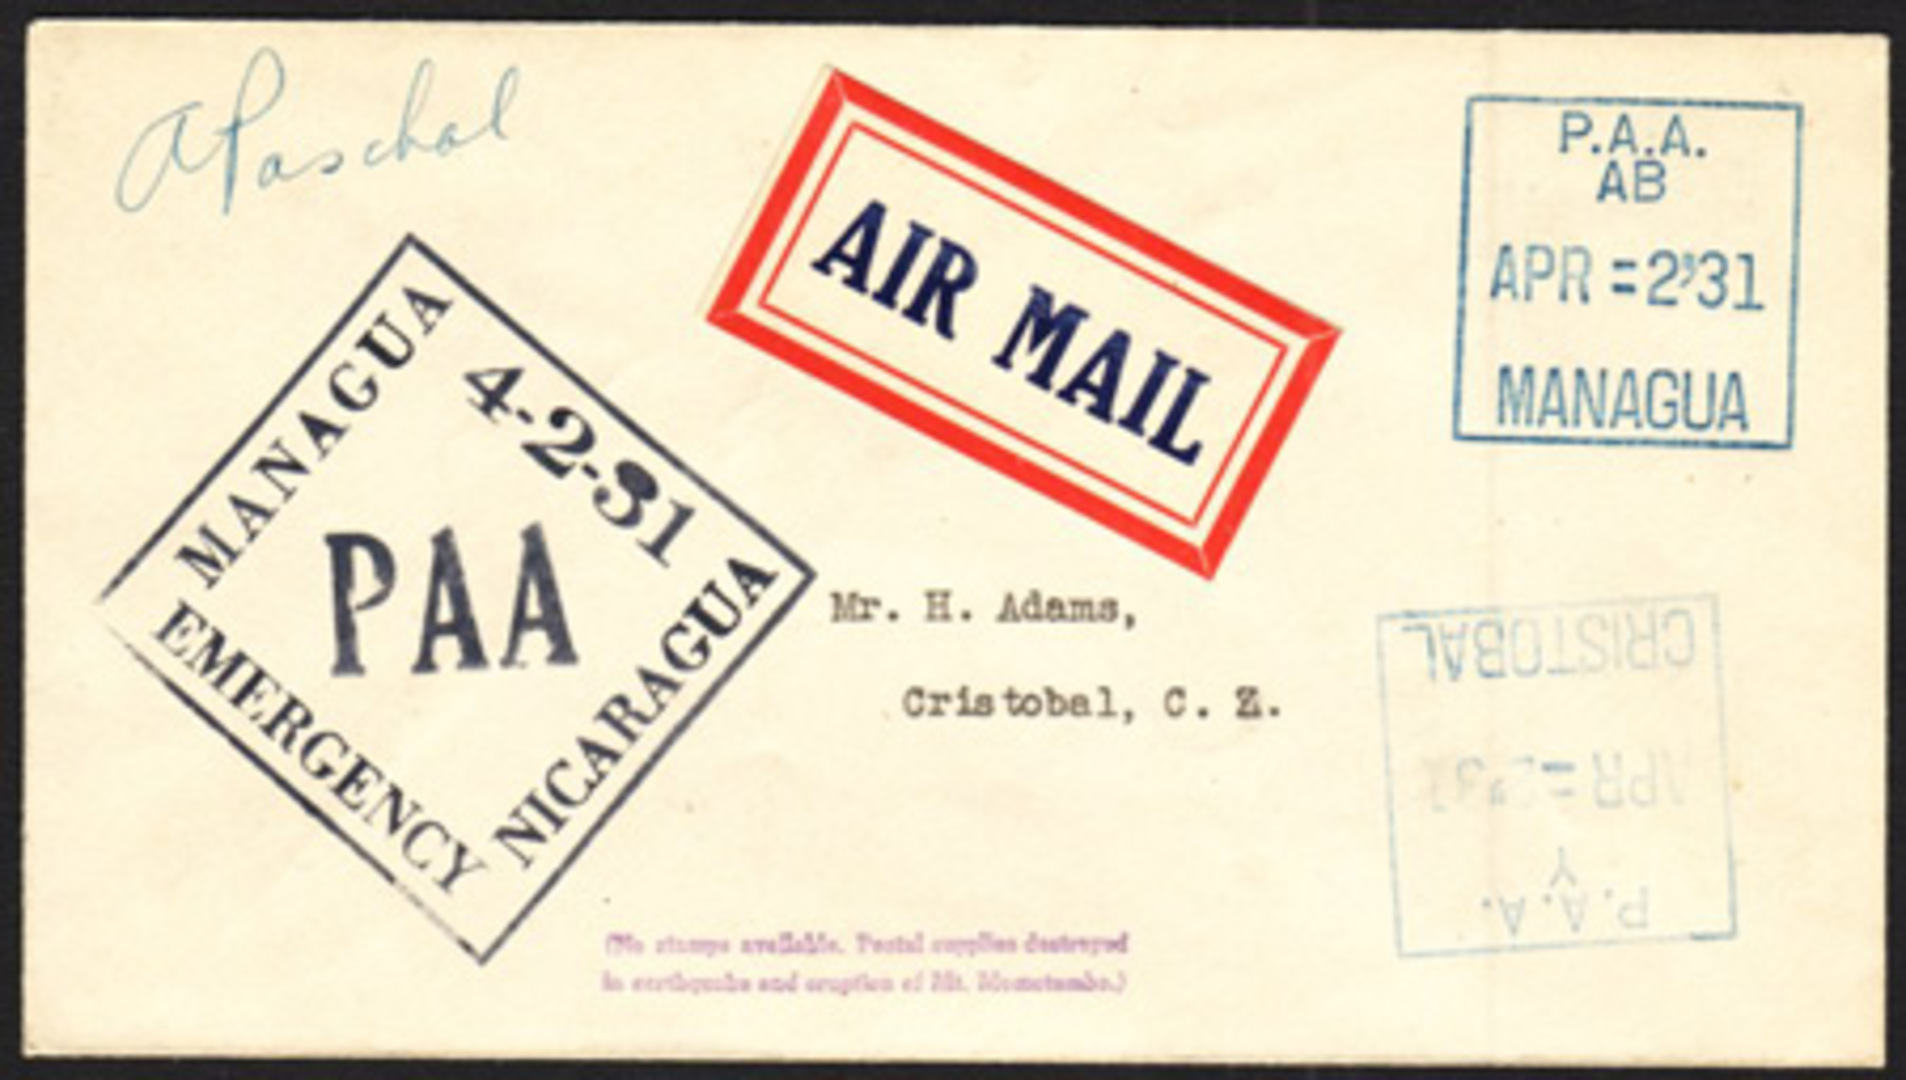 Rare cover from the 1931 Managua Earthquake Emergency Flights